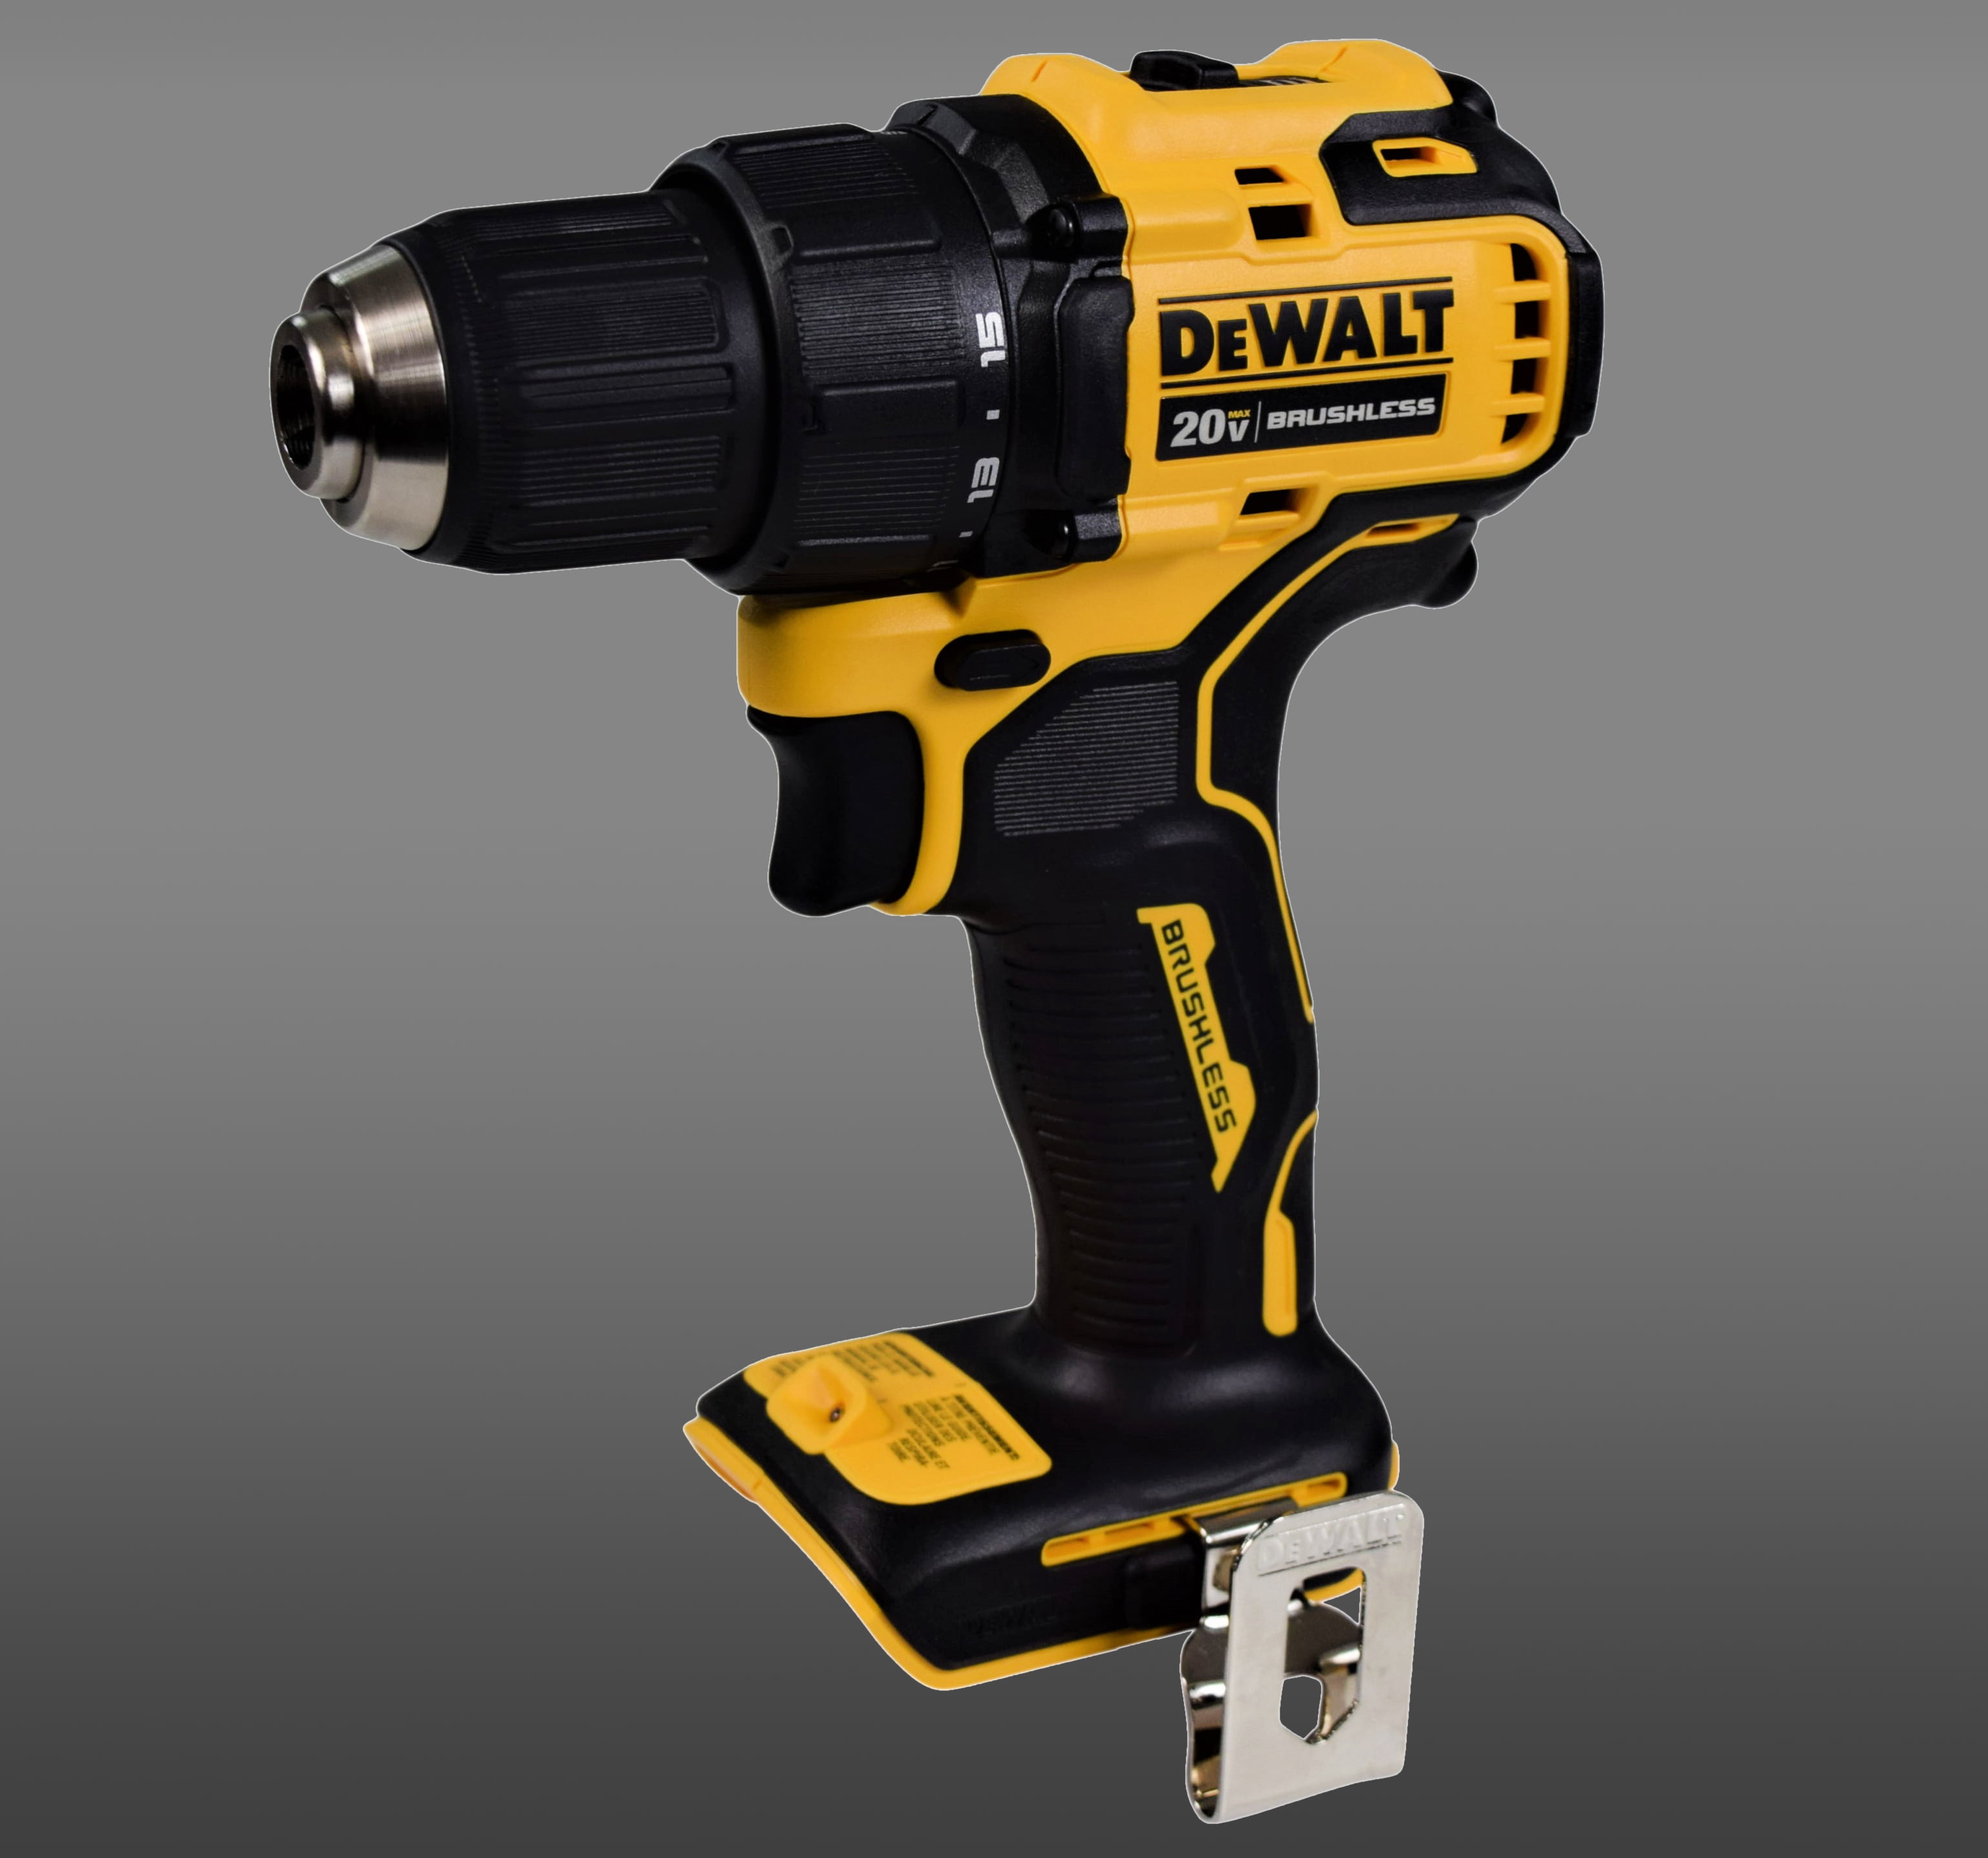 TOOL CONNECT™ 20V MAX* XR® Compact Drill/Driver (Tool Only)